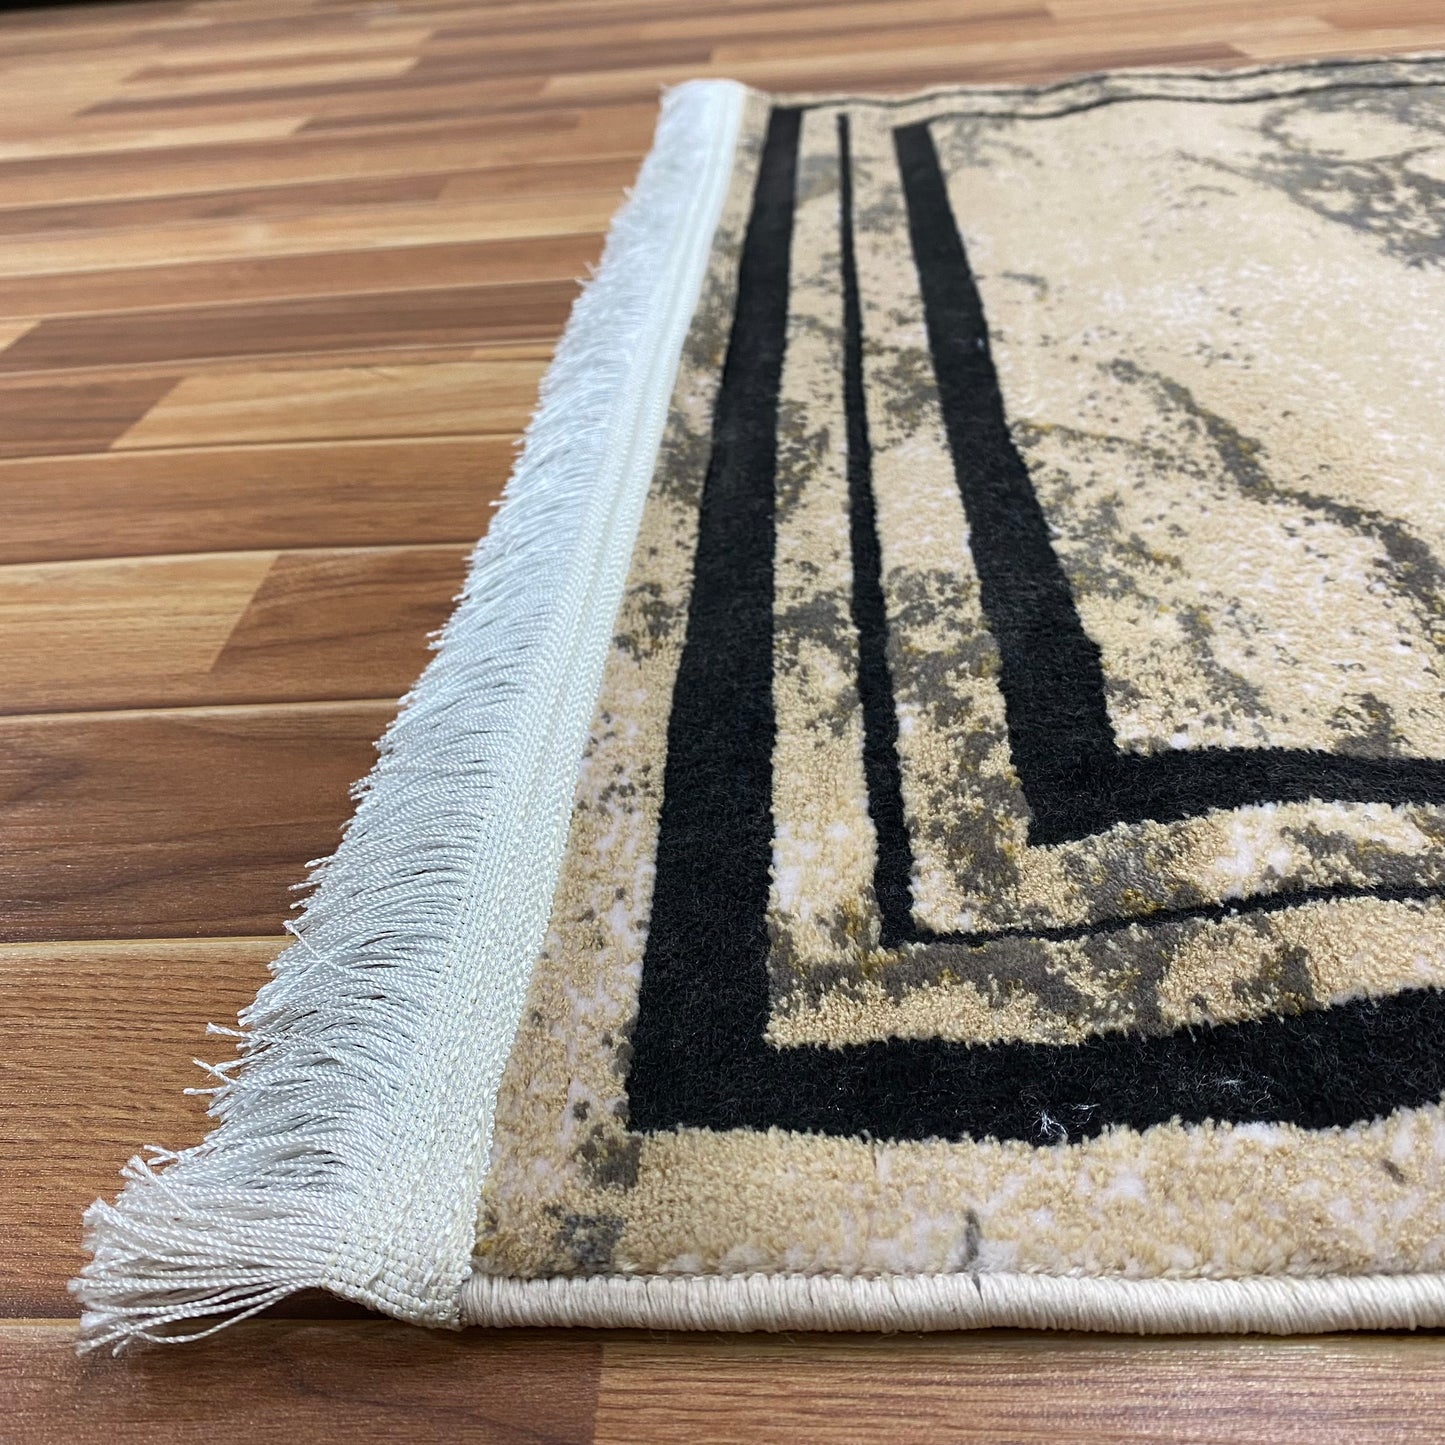 3 ft x 5 ft - Area Rug - Persian Silky 700 Reeds - Harmony 1 - Faded Beige and Black- Superior Comfort, Modern & Contemporary Style Accent Rugs